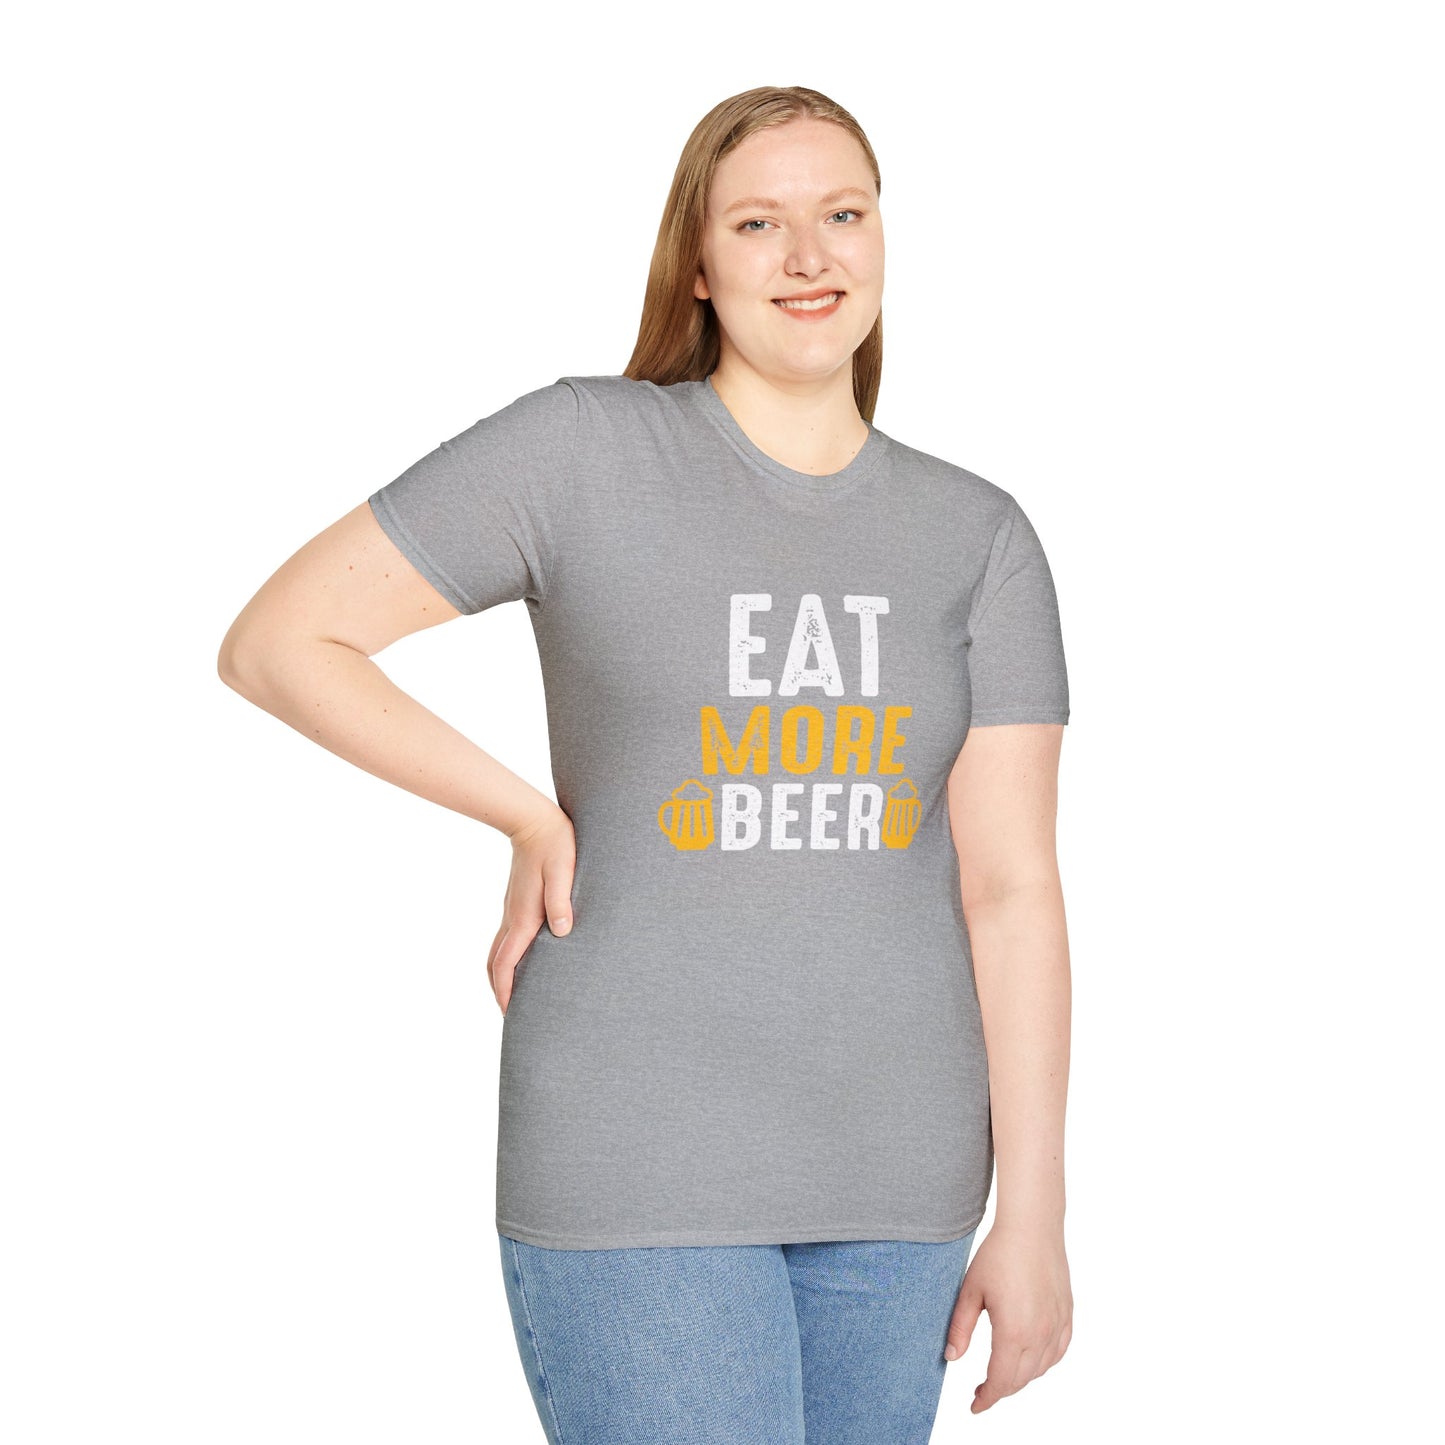 Cheers to Style: Embrace the Brew with Our 'Eat More Beer' T-Shirt